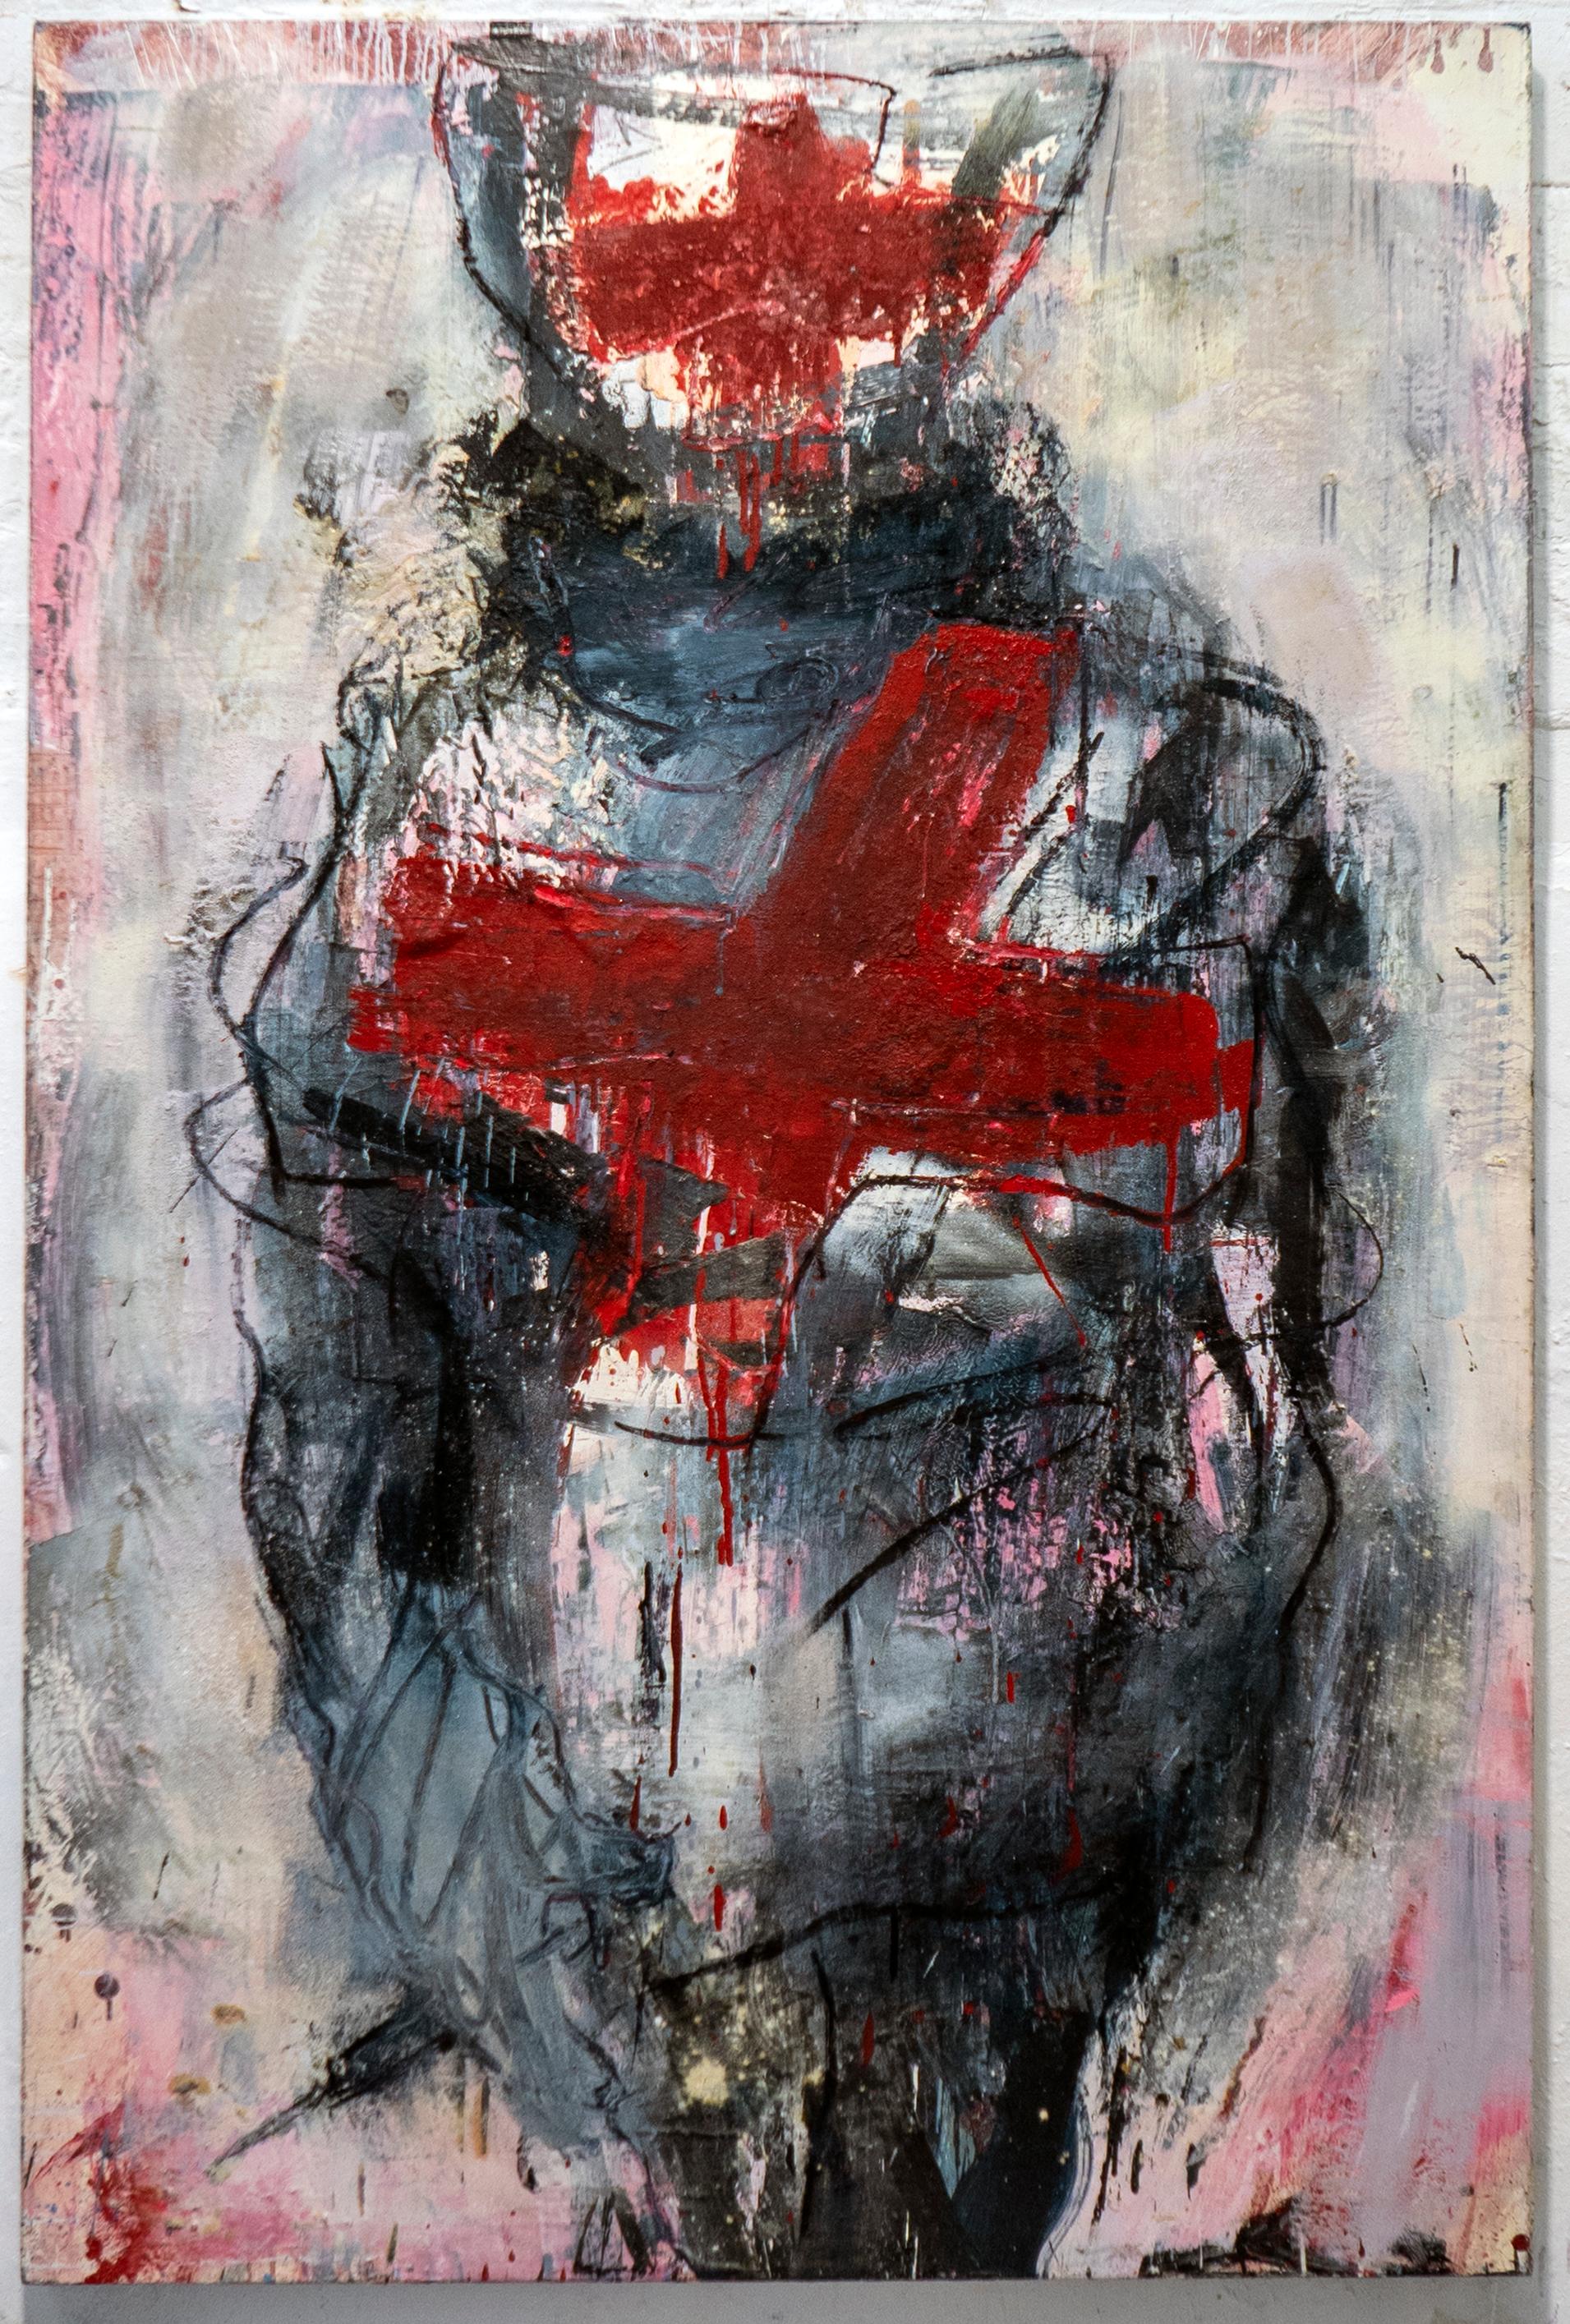 Chris Burns Abstract Painting - 'NURSE WITH SYRINGE', 2010-2012 Oil on canvas 200 x 130 cm Signed 